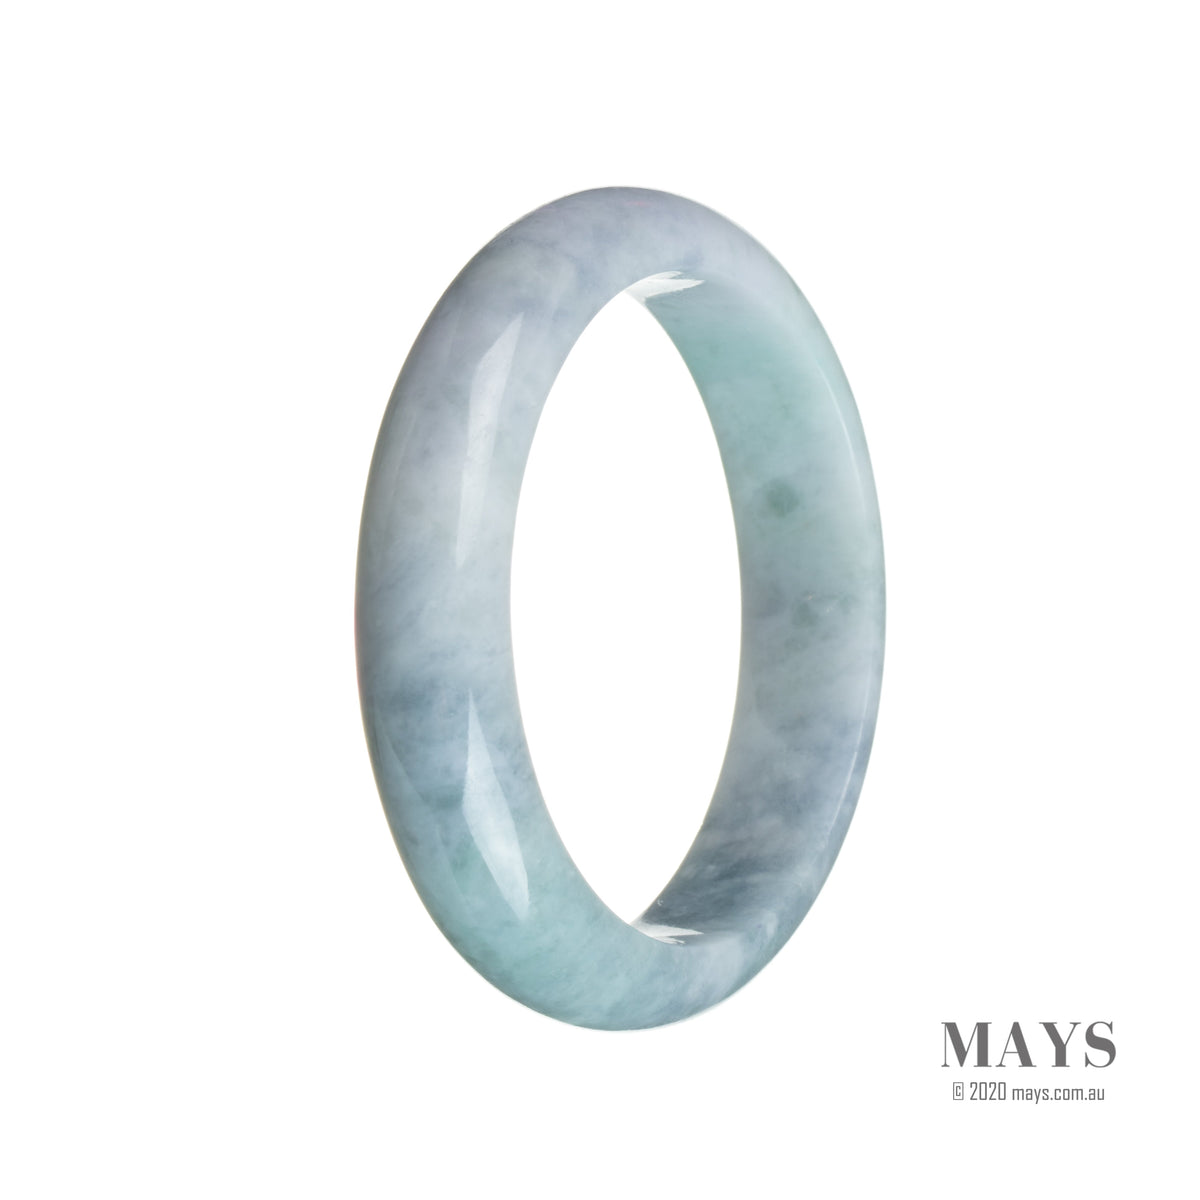 A lavender and grey jade bangle bracelet with a half moon design, made from authentic natural jadeite jade. Perfect for adding an elegant touch to any outfit.